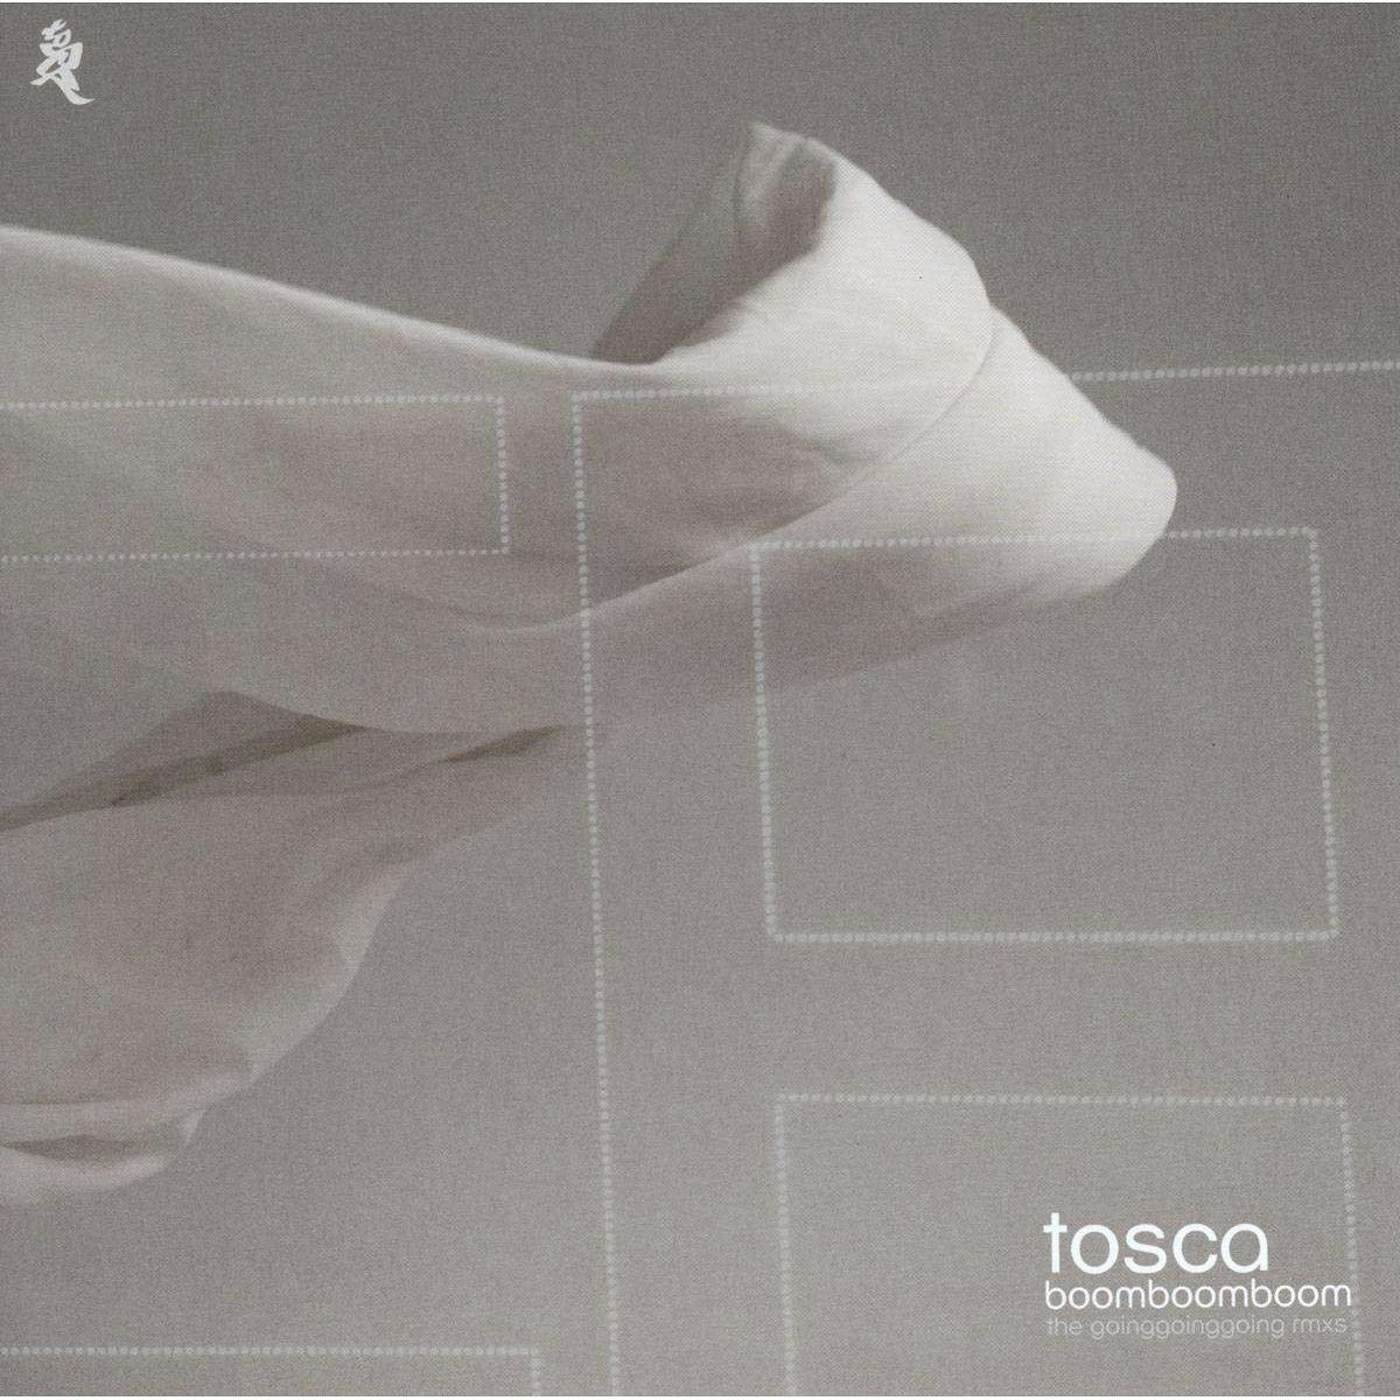 Tosca BOOM BOOM BOOM (THE GOING GOING GOING REMIXES) Vinyl Record